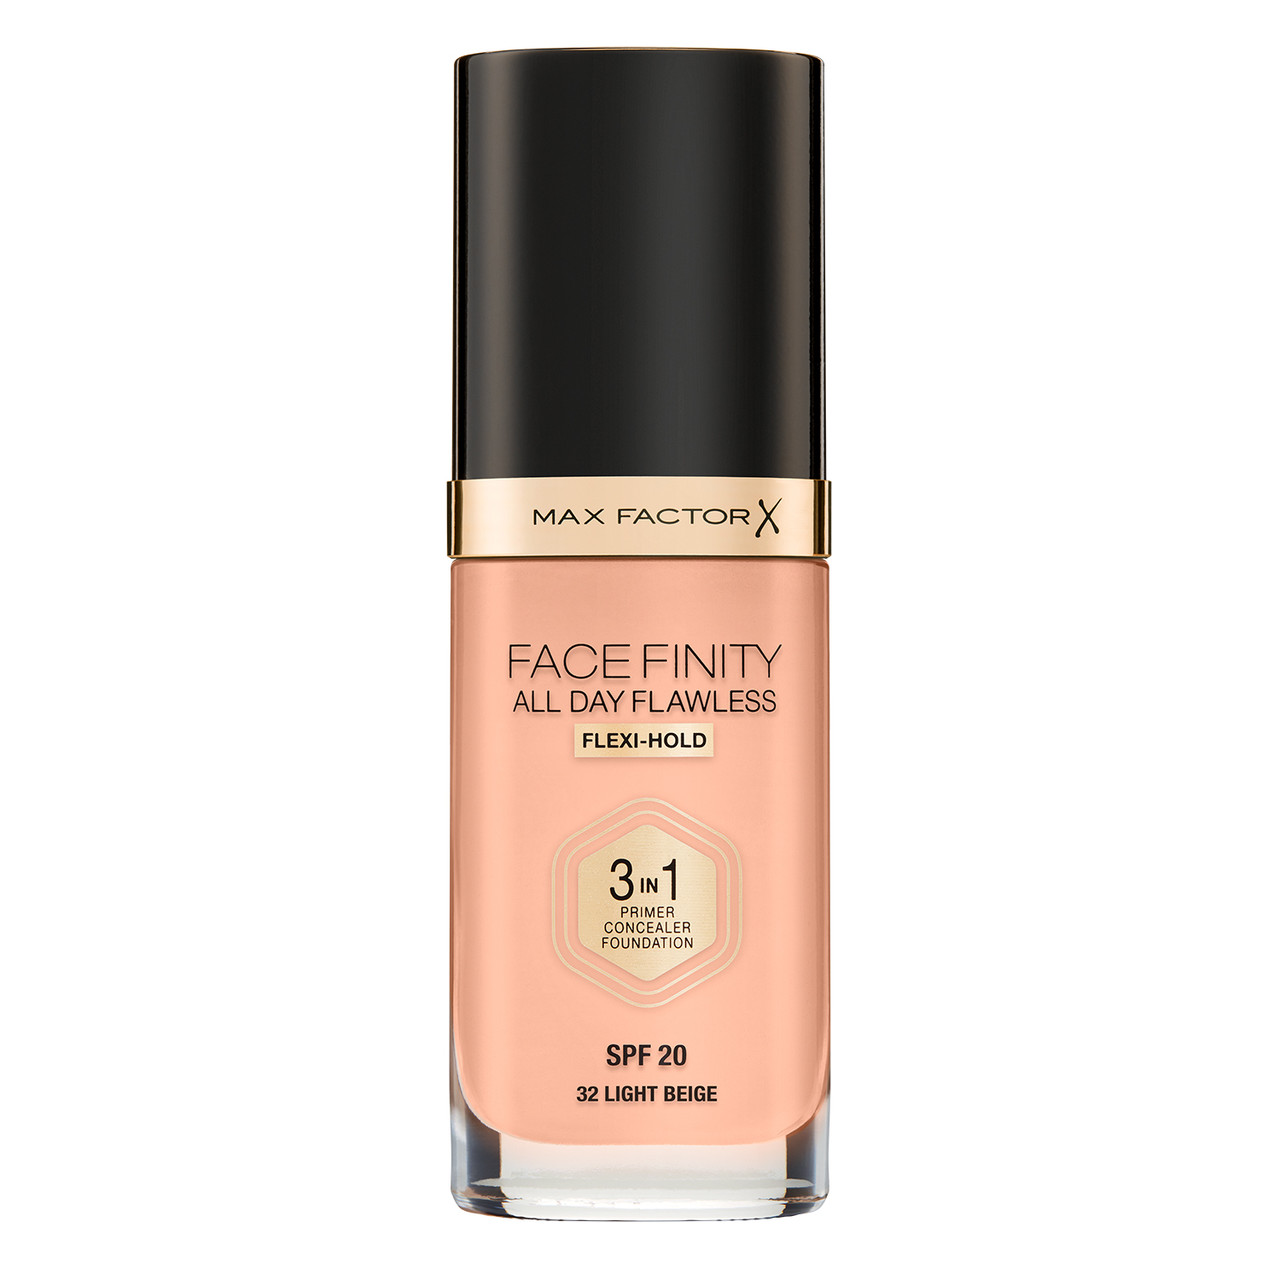 MAXFACTOR Facefinity All Day Flawless 3in1 тон 32 SPF20 - фото 1 - id-p154863392